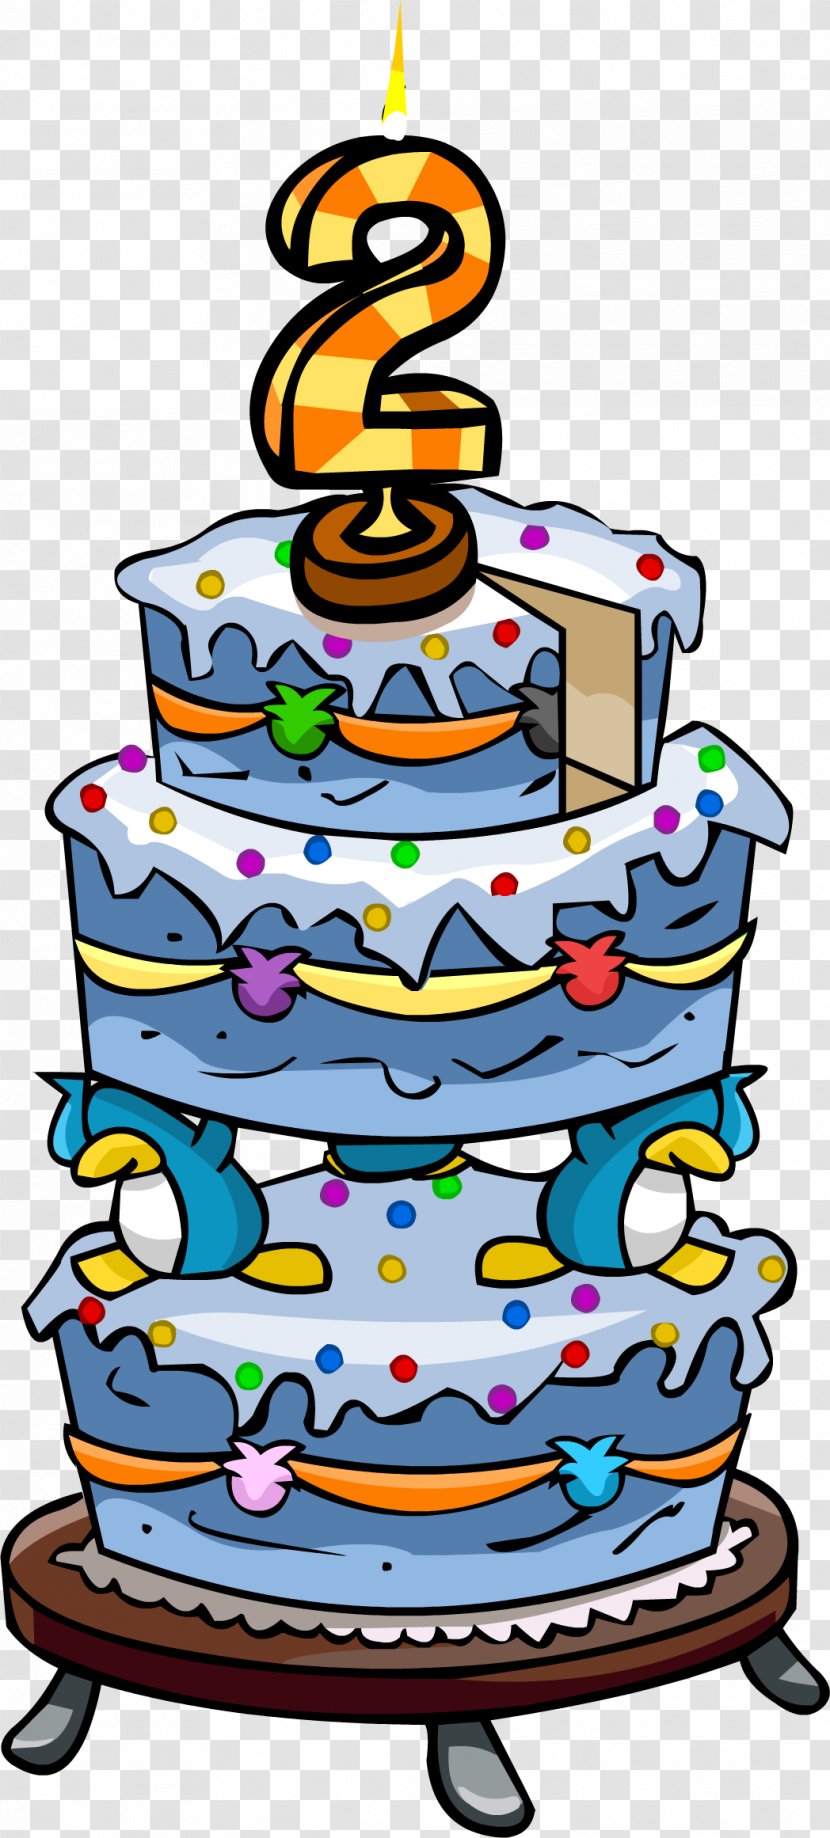 Club Penguin Birthday Cake Party - Artwork Transparent PNG